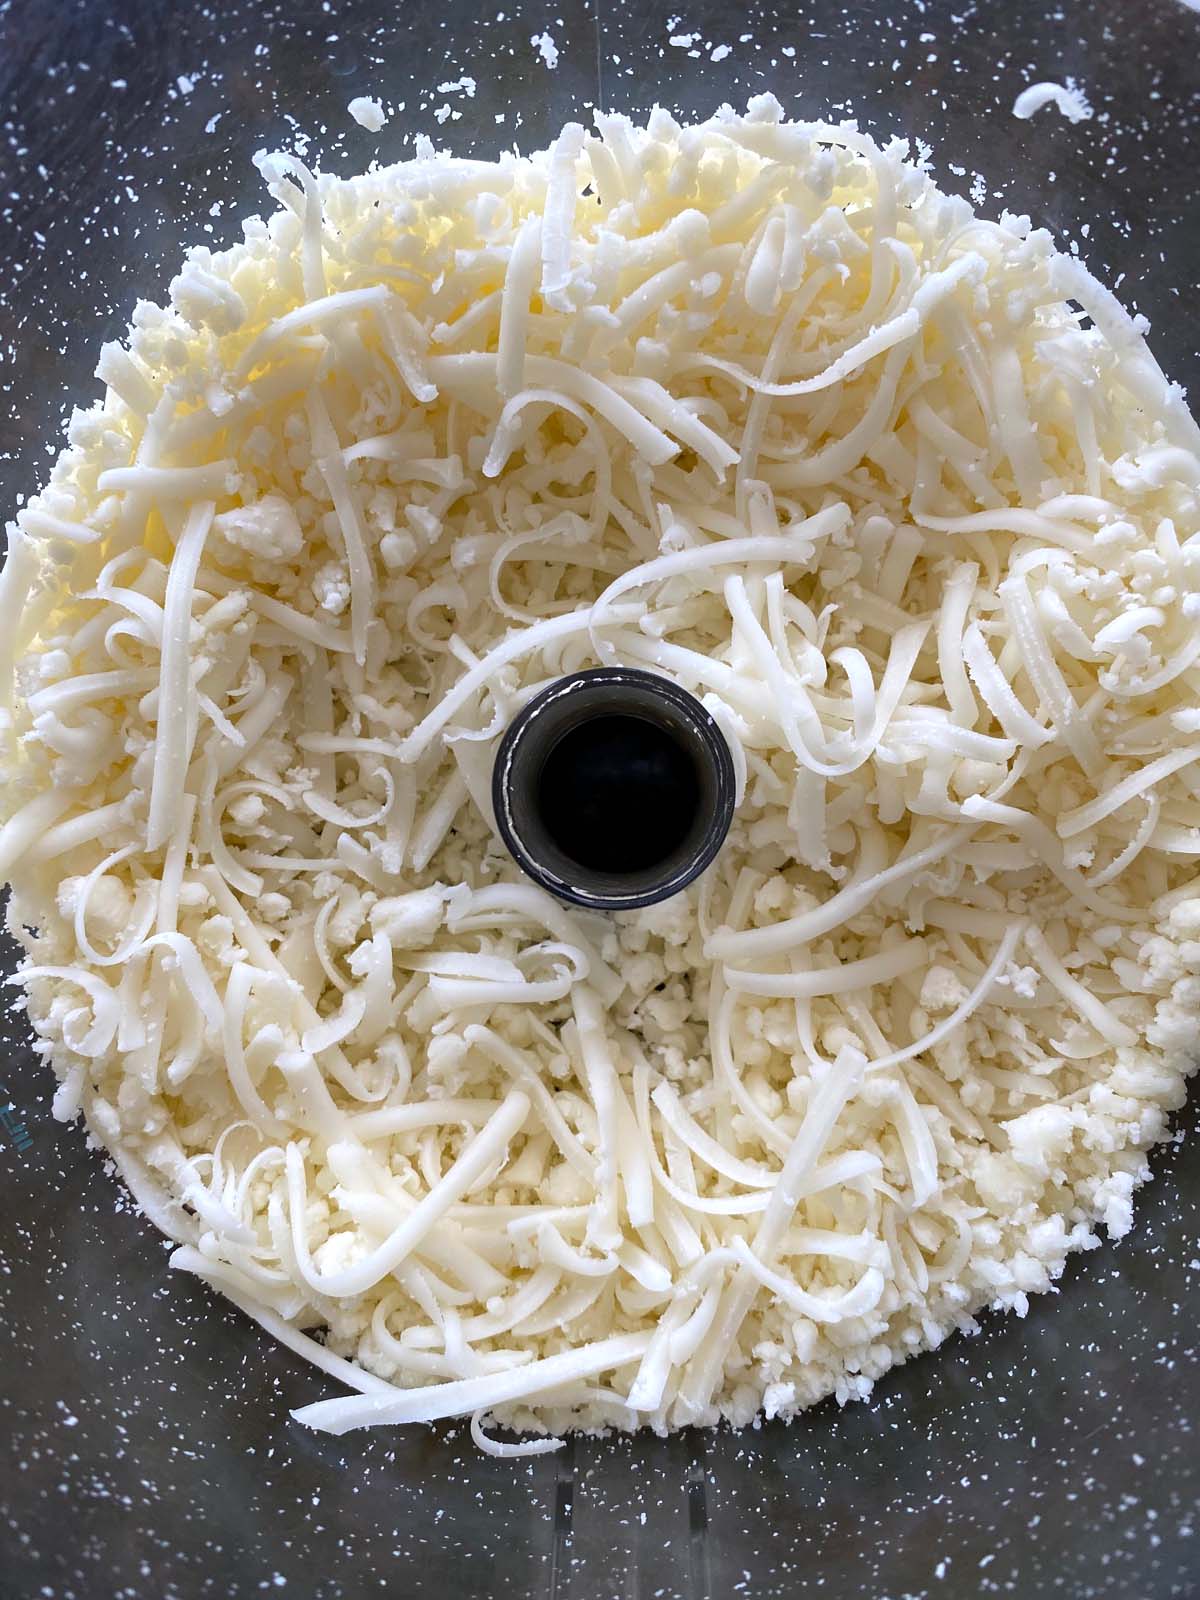 How To Grate Cheese in A Food Processor